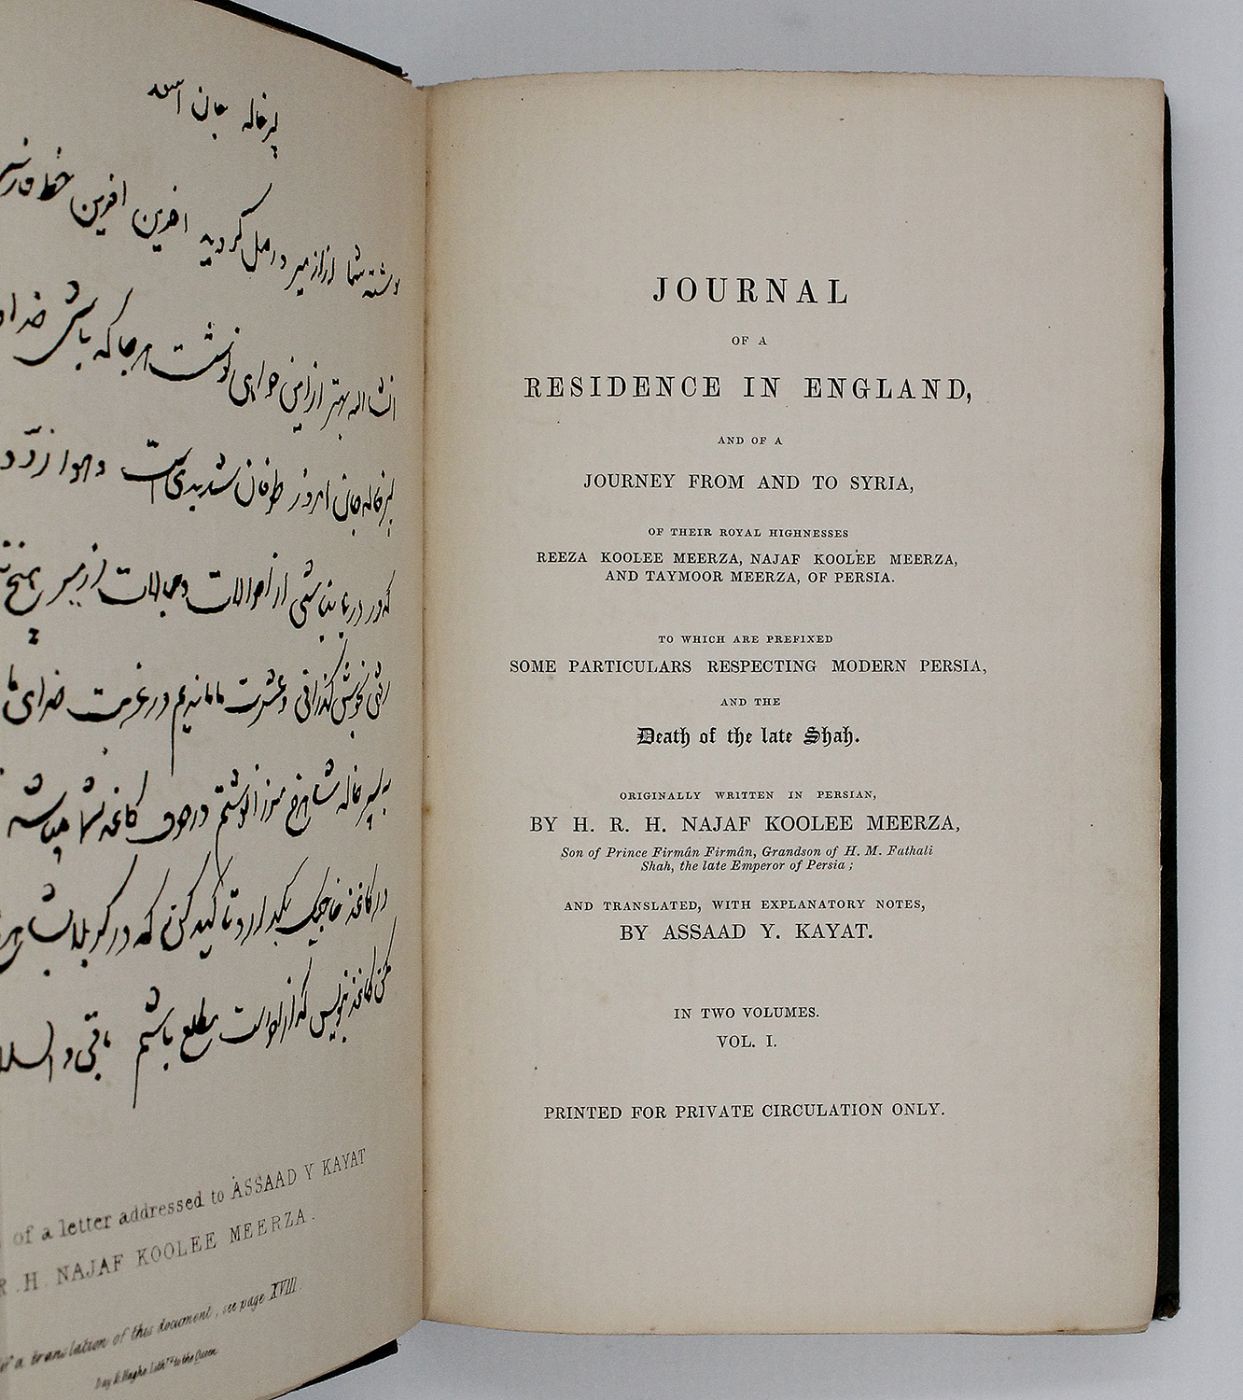 JOURNAL OF A RESIDENCE IN ENGLAND, And of a Journey from and to Syria of Their Royal Highnesses Reeza Koolee Meerza, Najaf Koolee Meerza, and Taymoor Meerza, of Persia. -  image 4